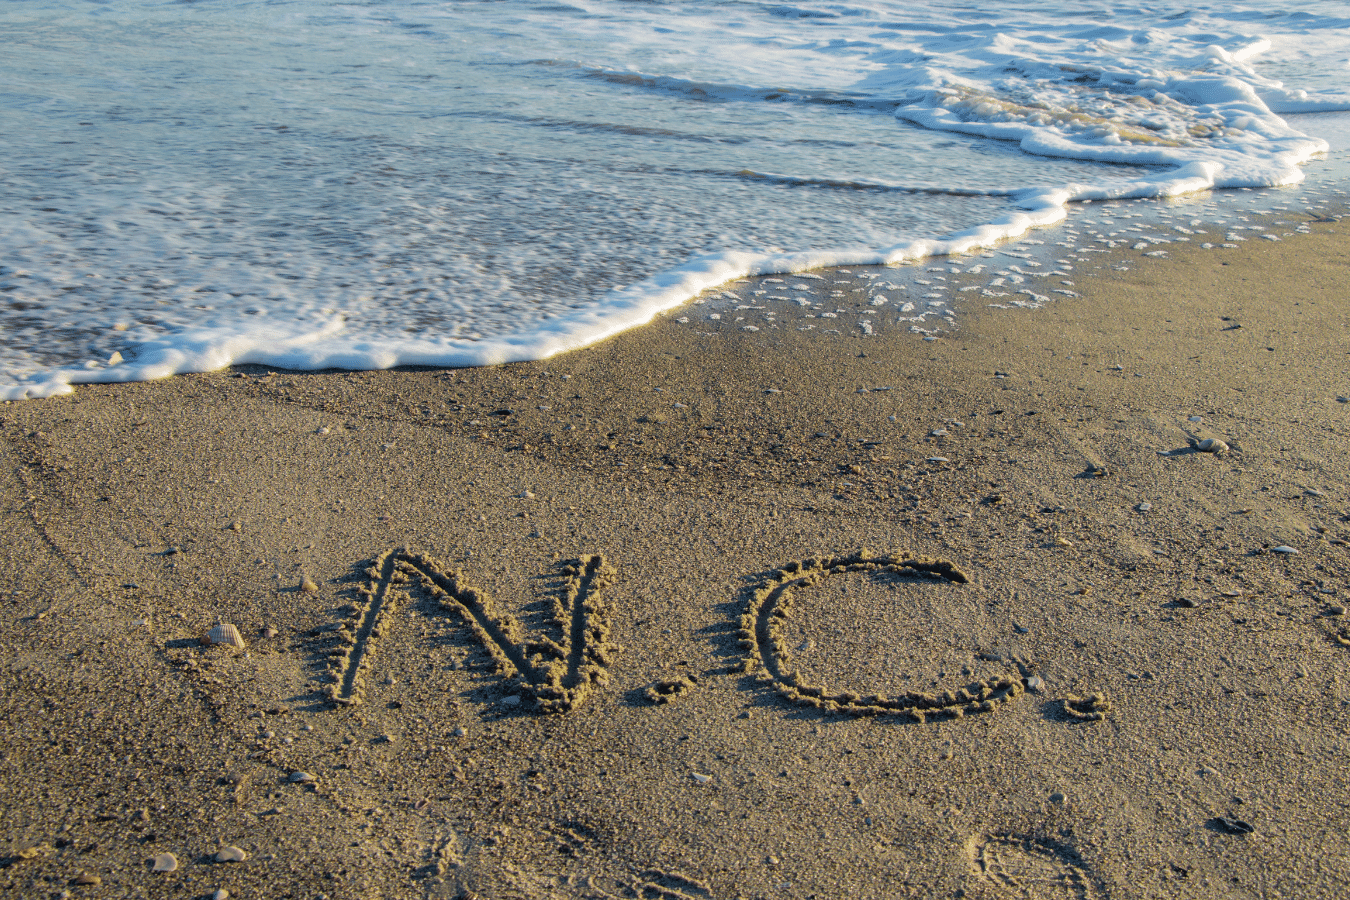 The North Carolina NC written in the sand on the beach